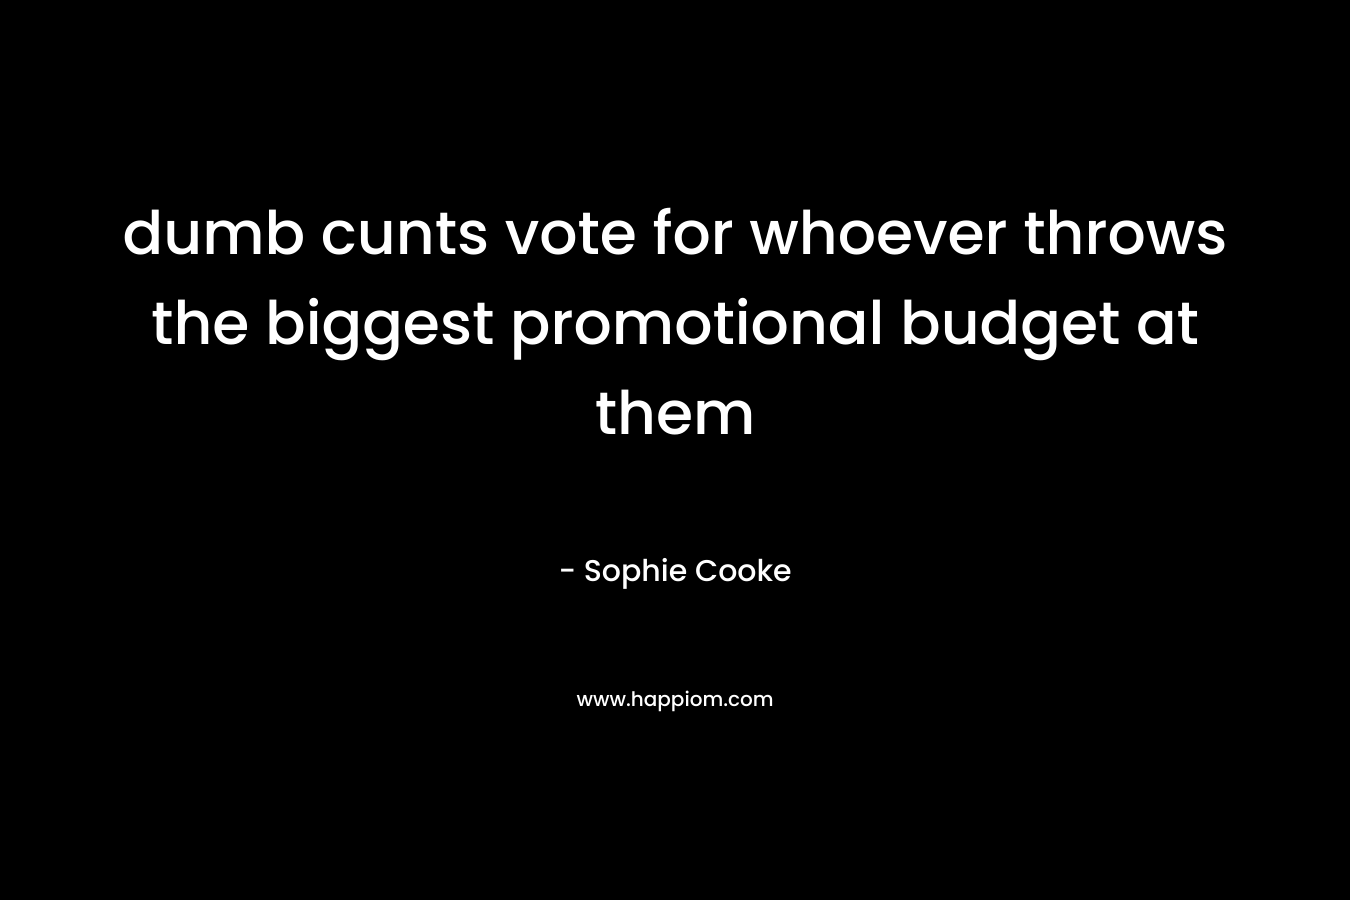 dumb cunts vote for whoever throws the biggest promotional budget at them – Sophie Cooke